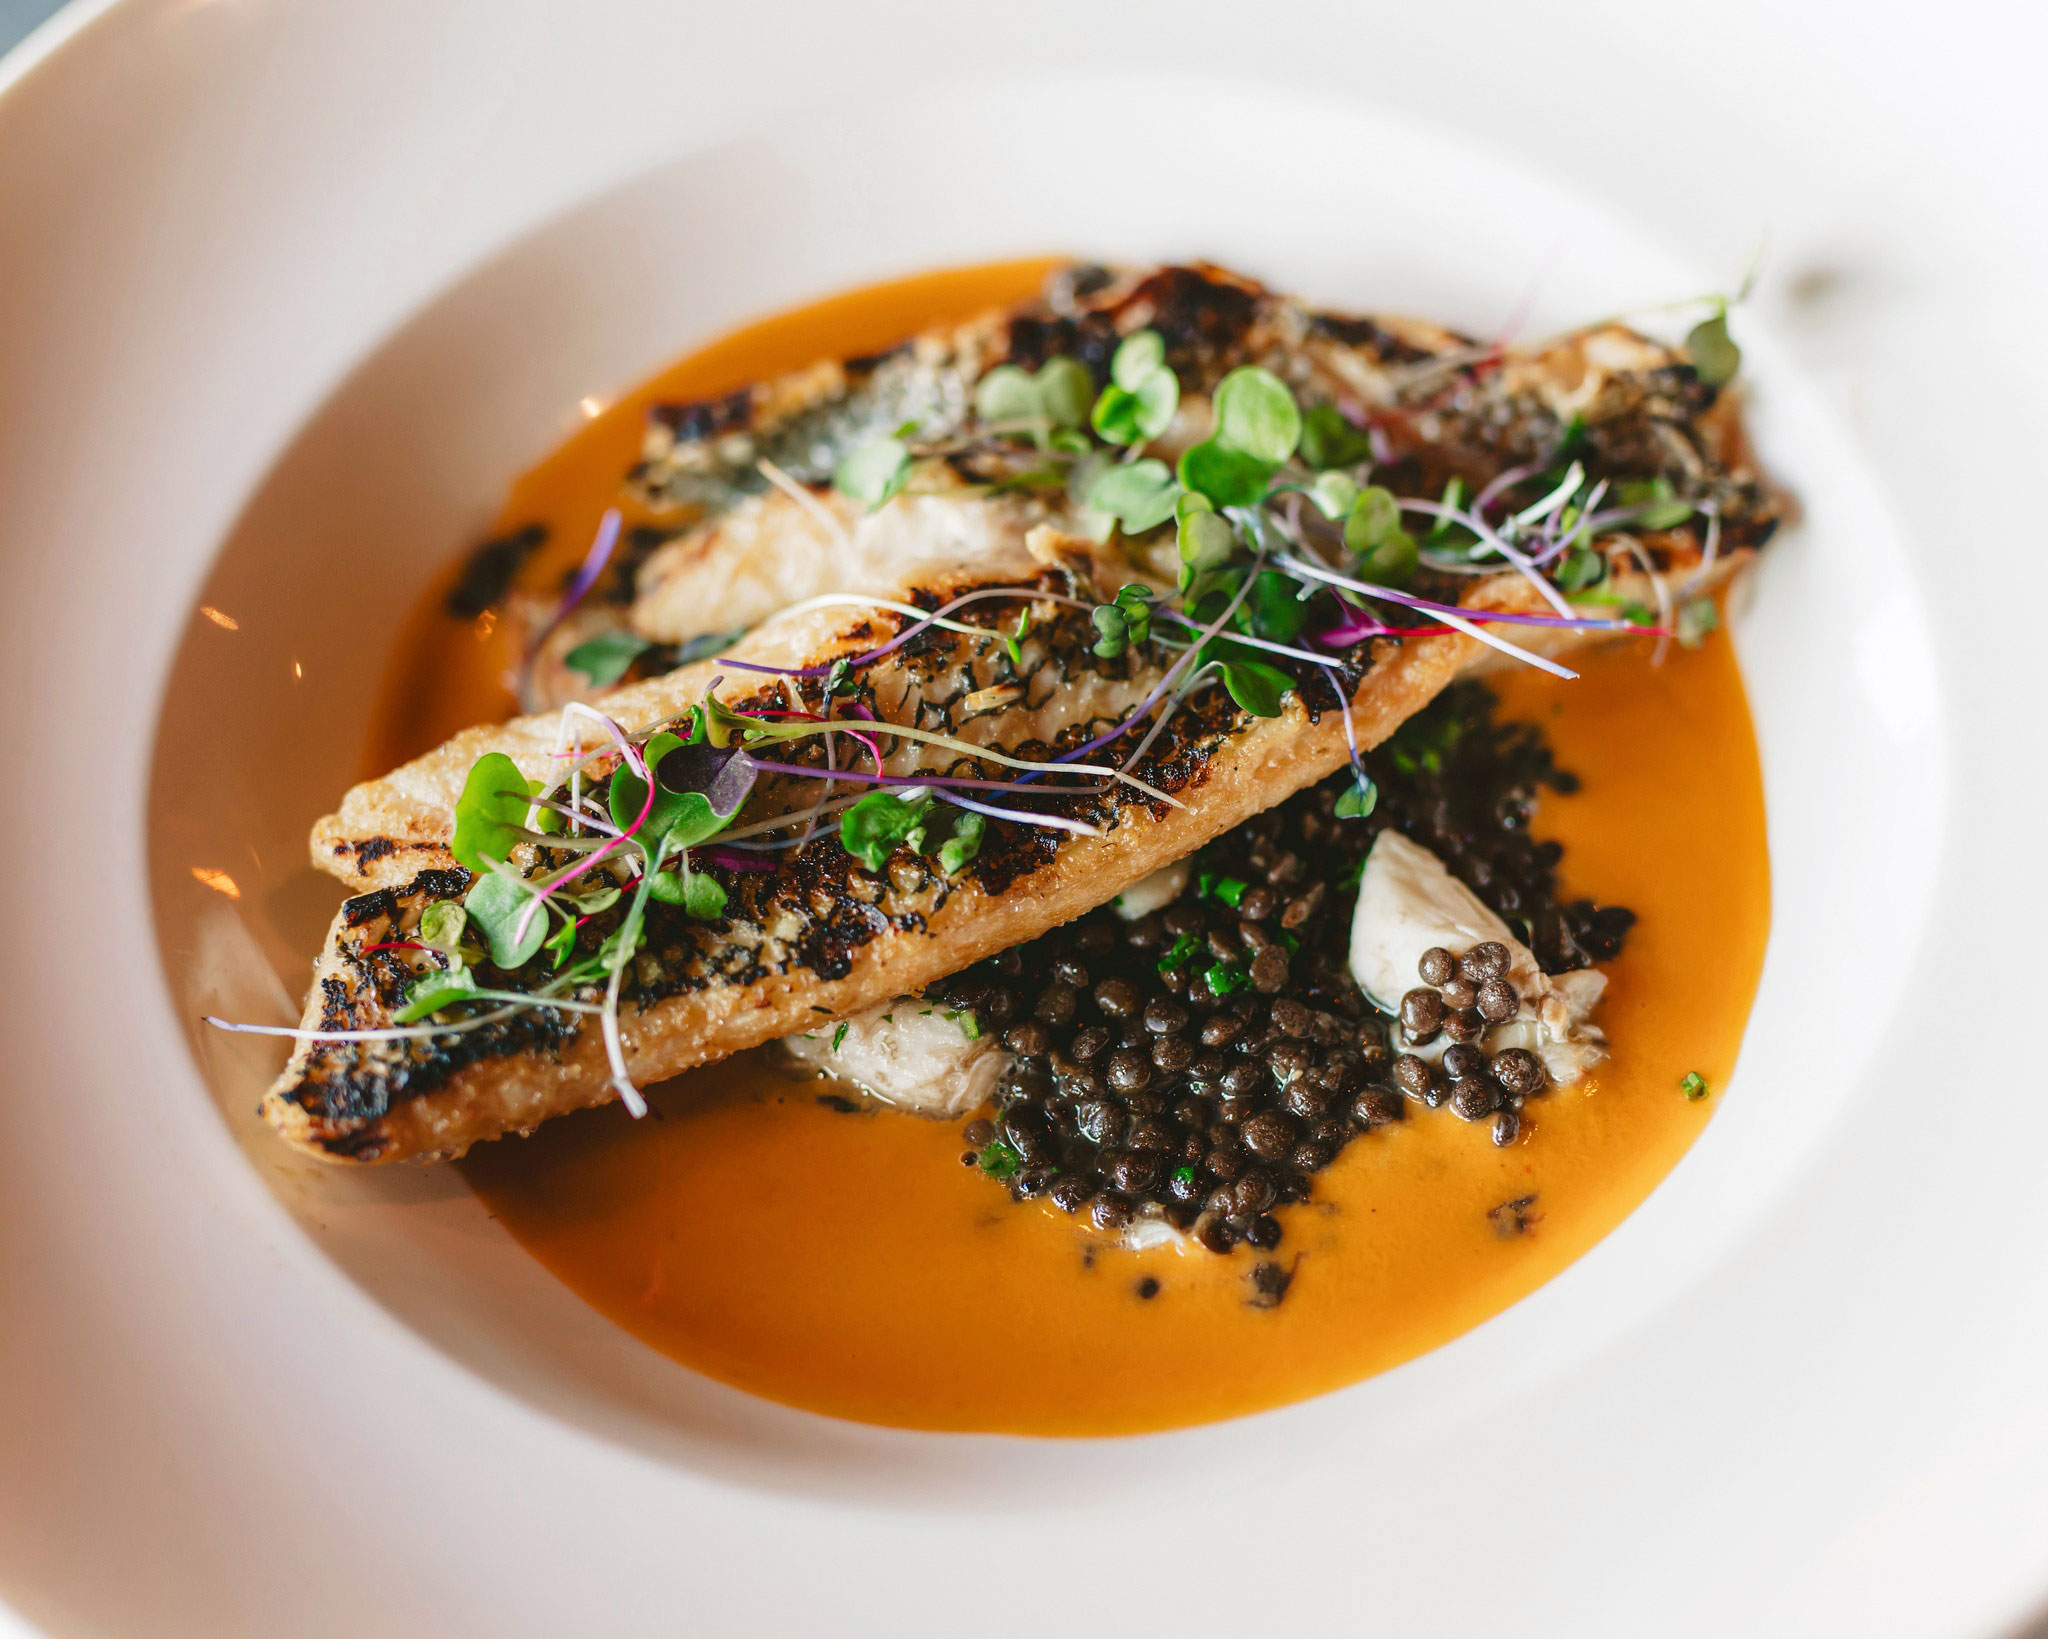 Grilled Black Grouper - Beluga Lentils, Colossal Crab Meat, Coconut Curry